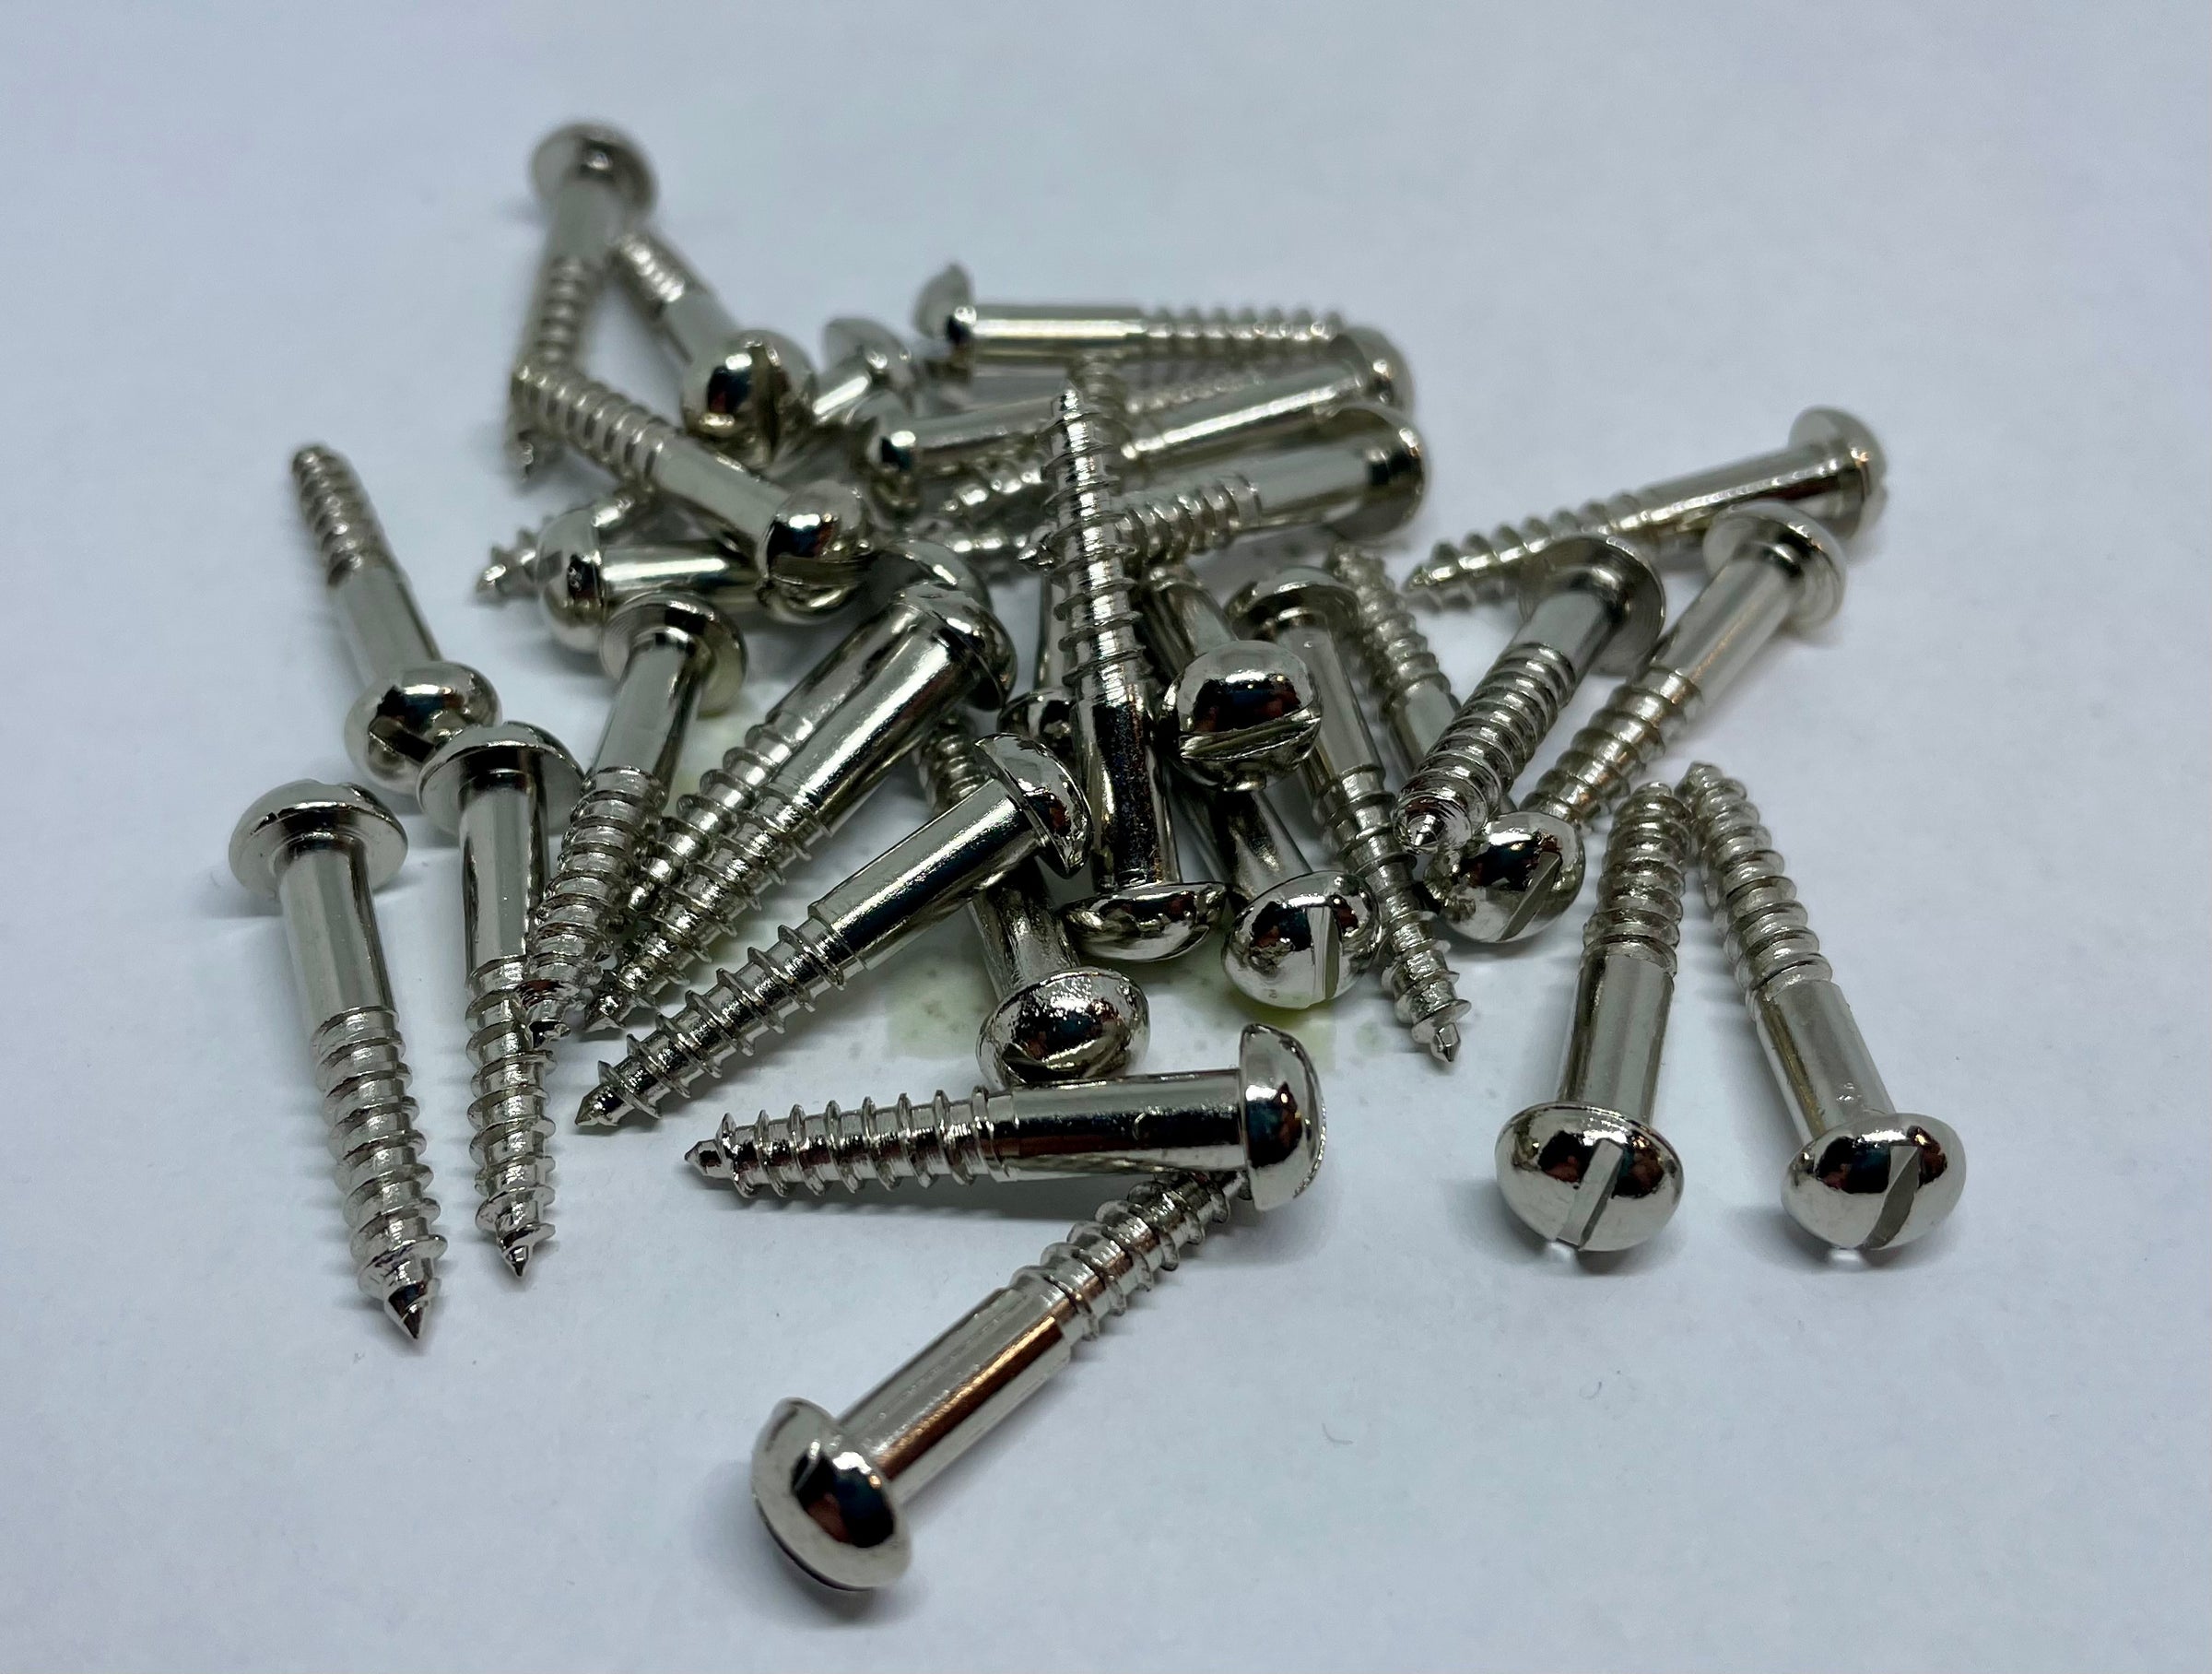 Slotted Round Head Wood Screw, Nickel plated